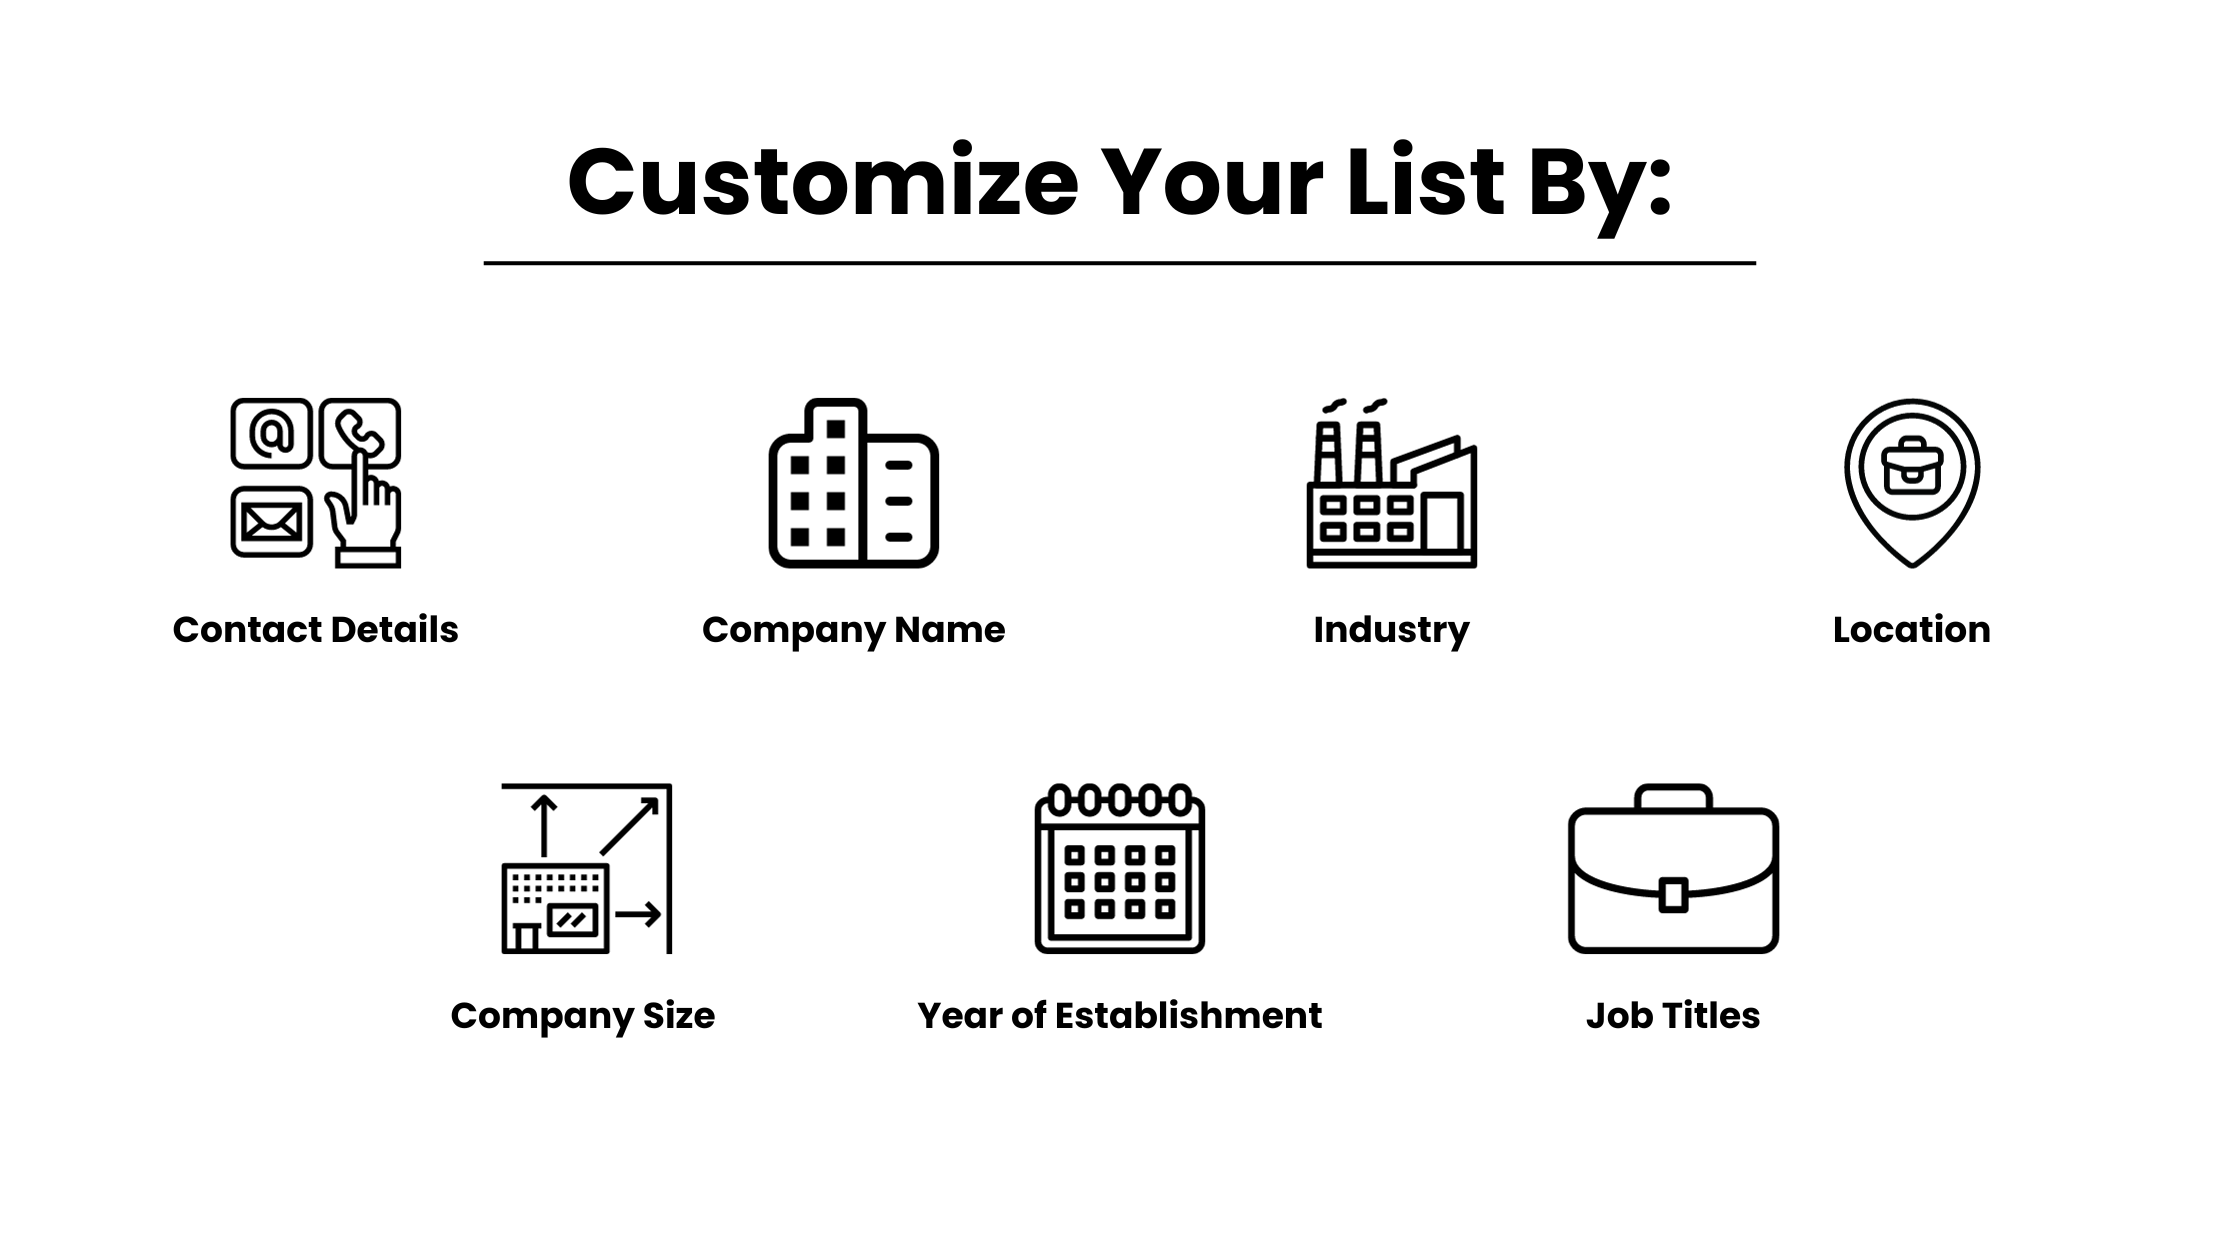 Customize your Email List by